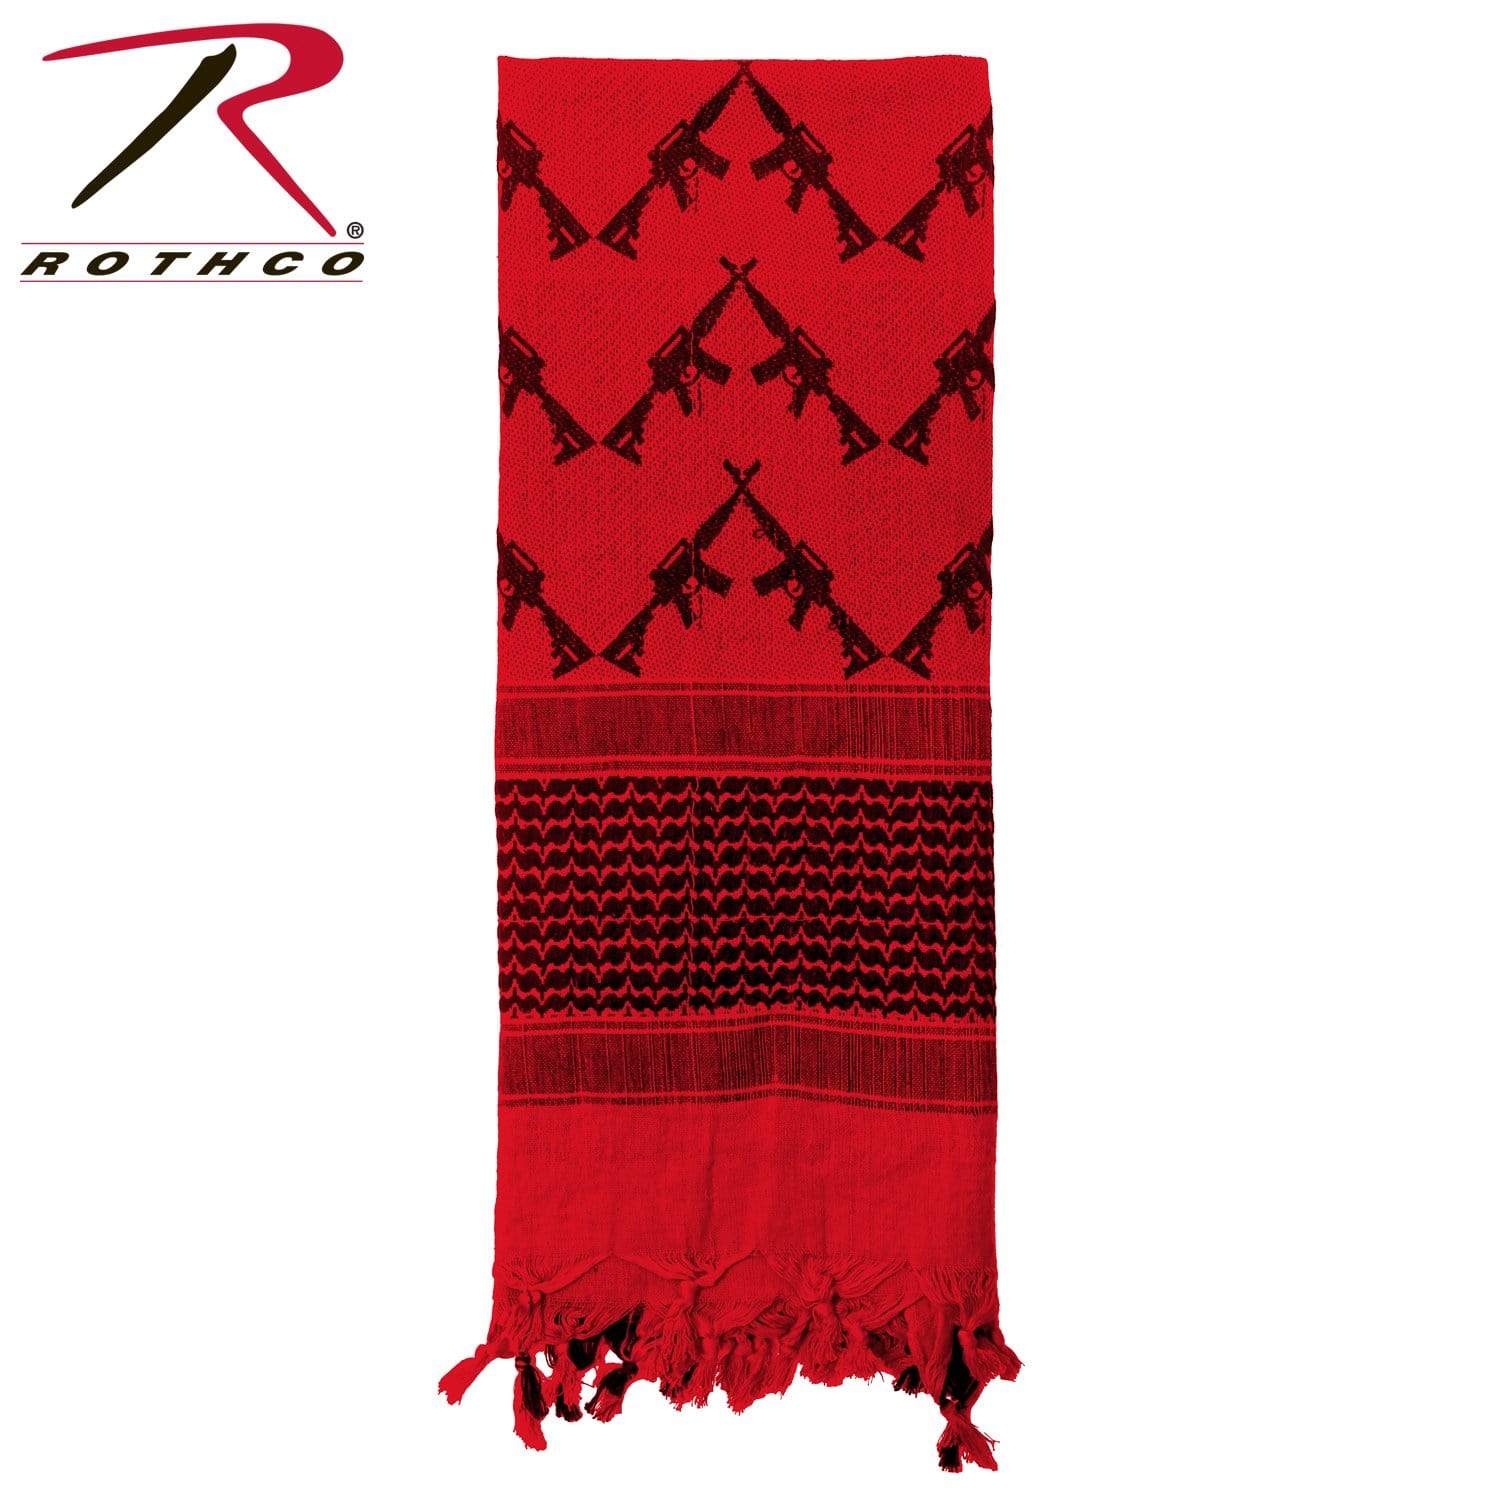 Rothco Crossed Rifles Shemagh Tactical Desert Keffiyeh Scarf - Red - Eminent Paintball And Airsoft